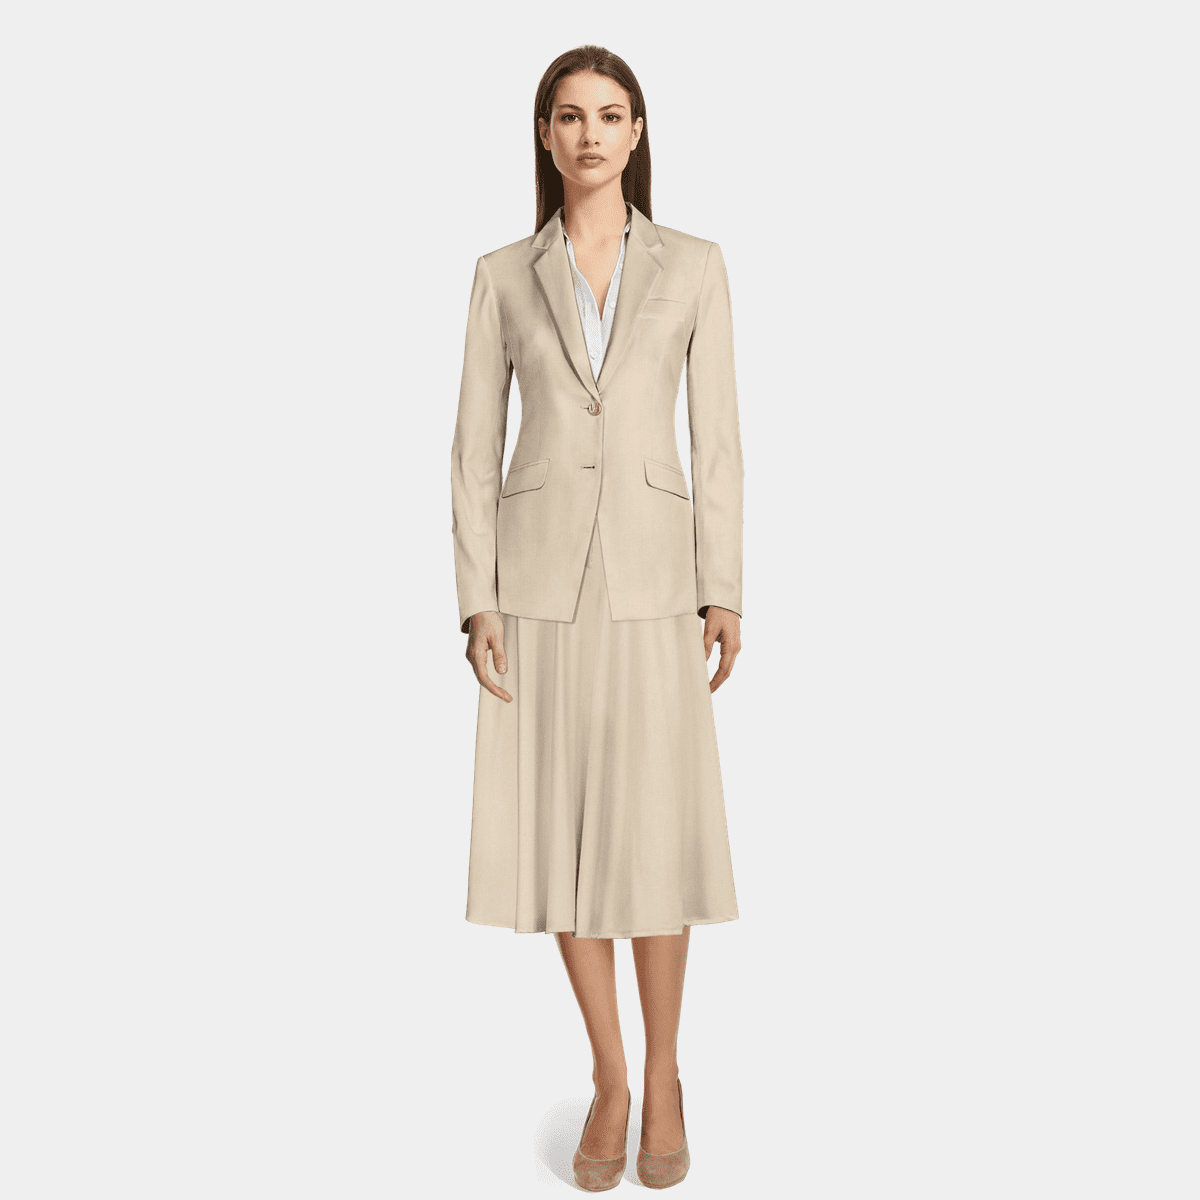 Sand double breasted Summer short Skirt Suit